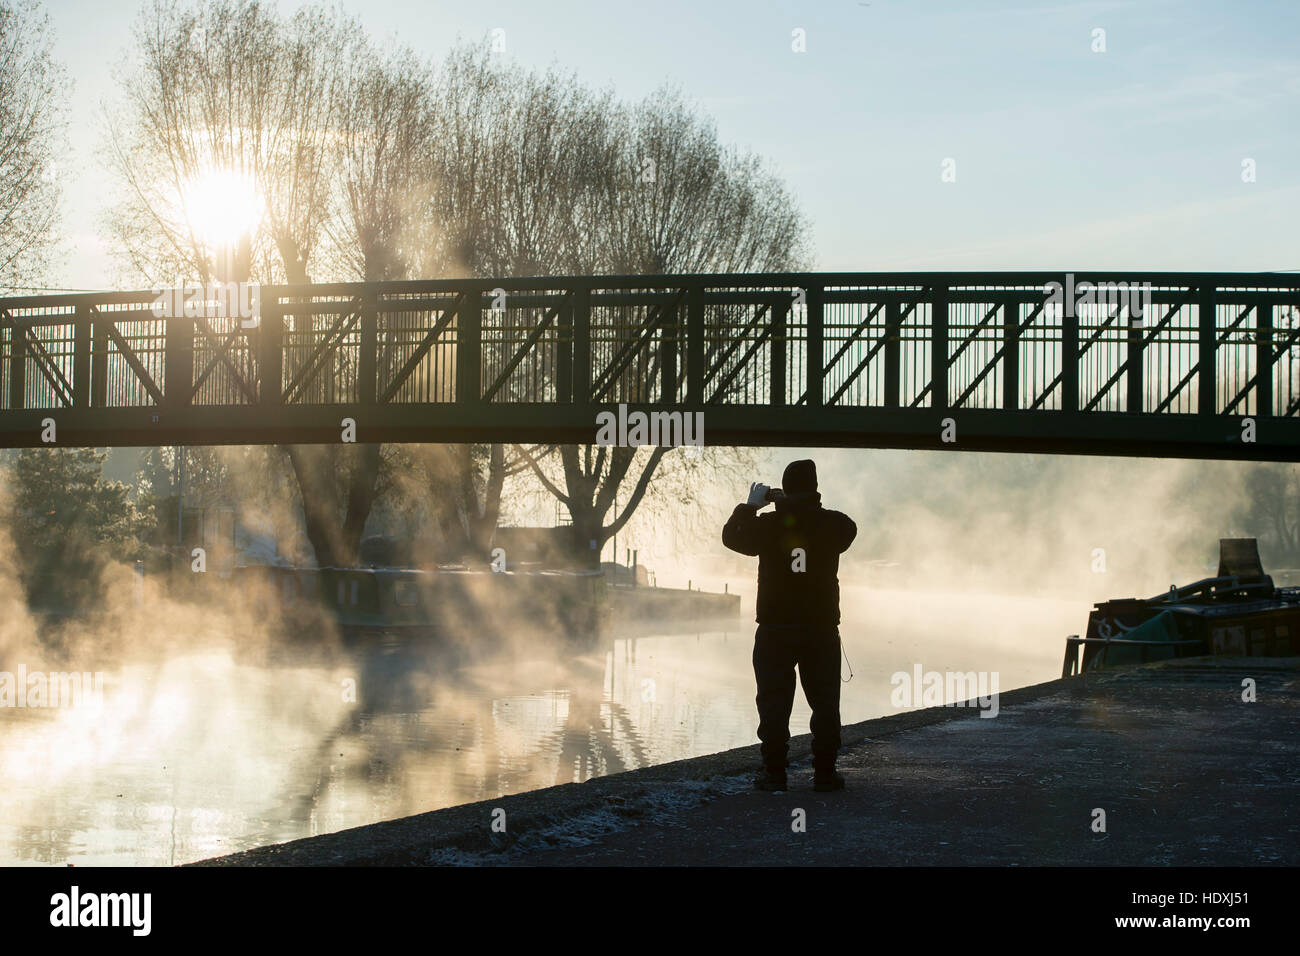 30th November, 2016. London, UK.  A man takes a photograph of the River Lea in Tottenham, London, on a cold misty morning. Photo: David Mirzoeff/ Alam Stock Photo